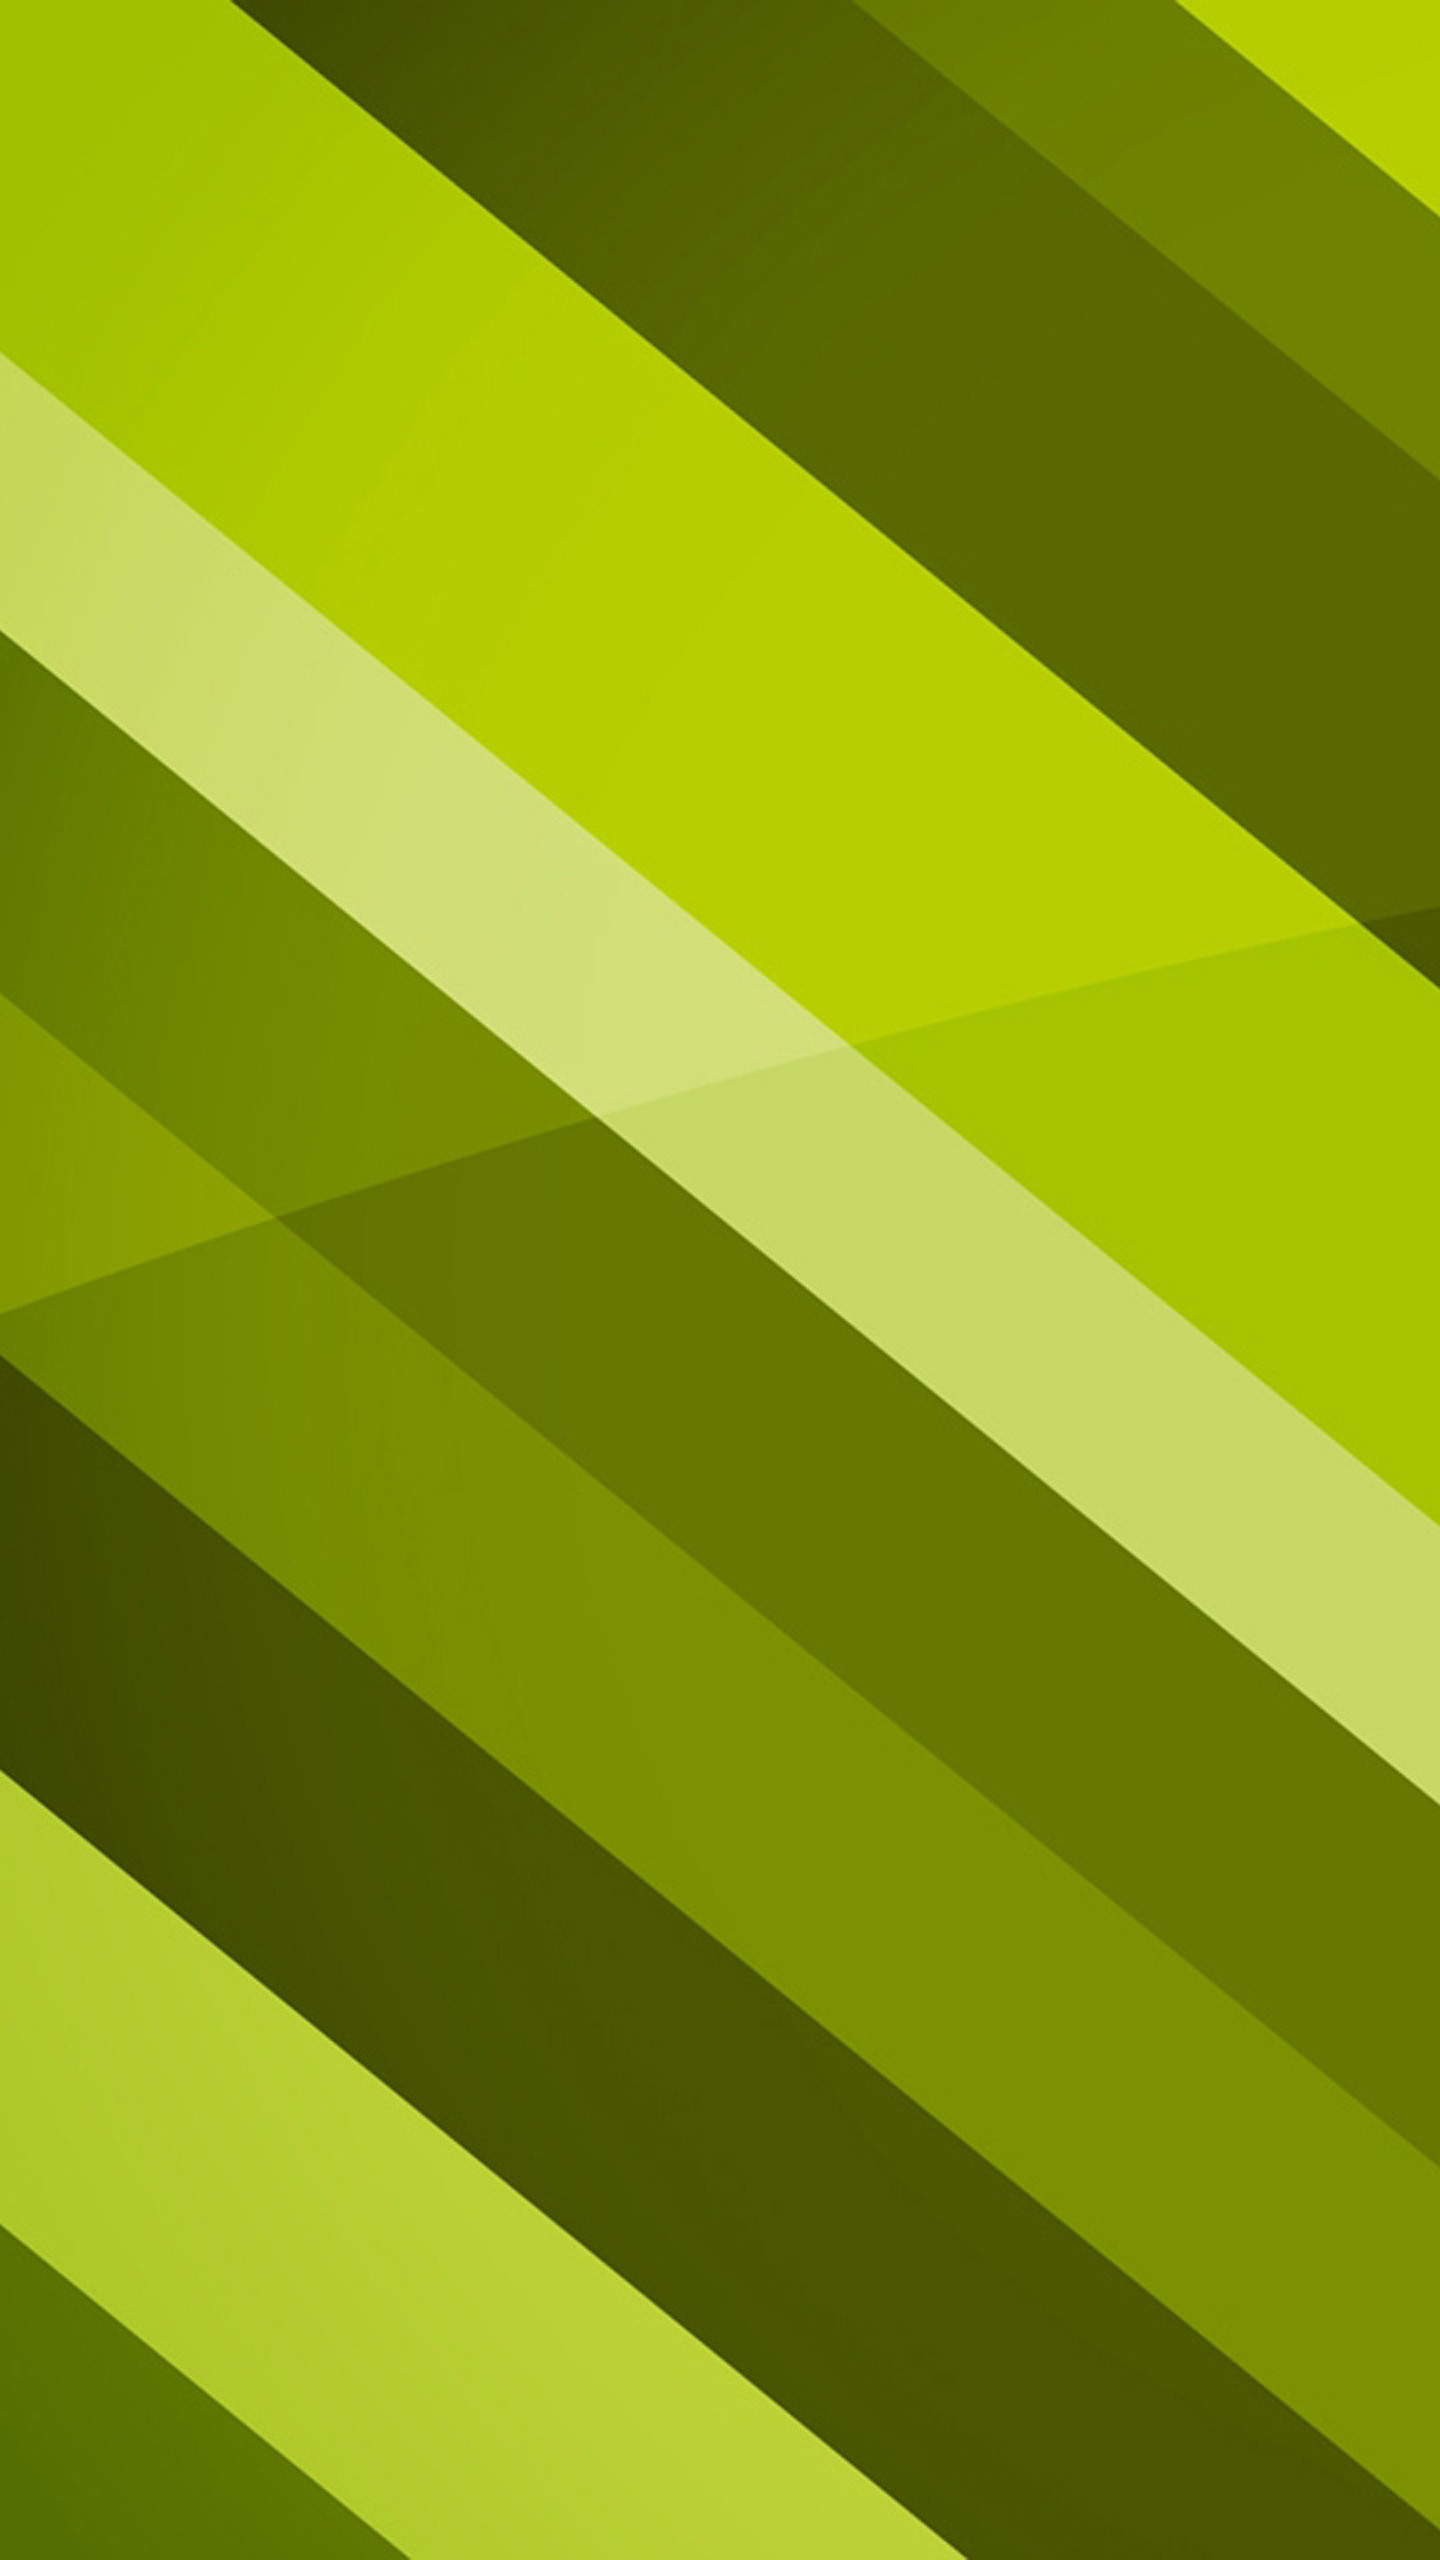 1440x2560 Textures LG G3 Wallpapers 87